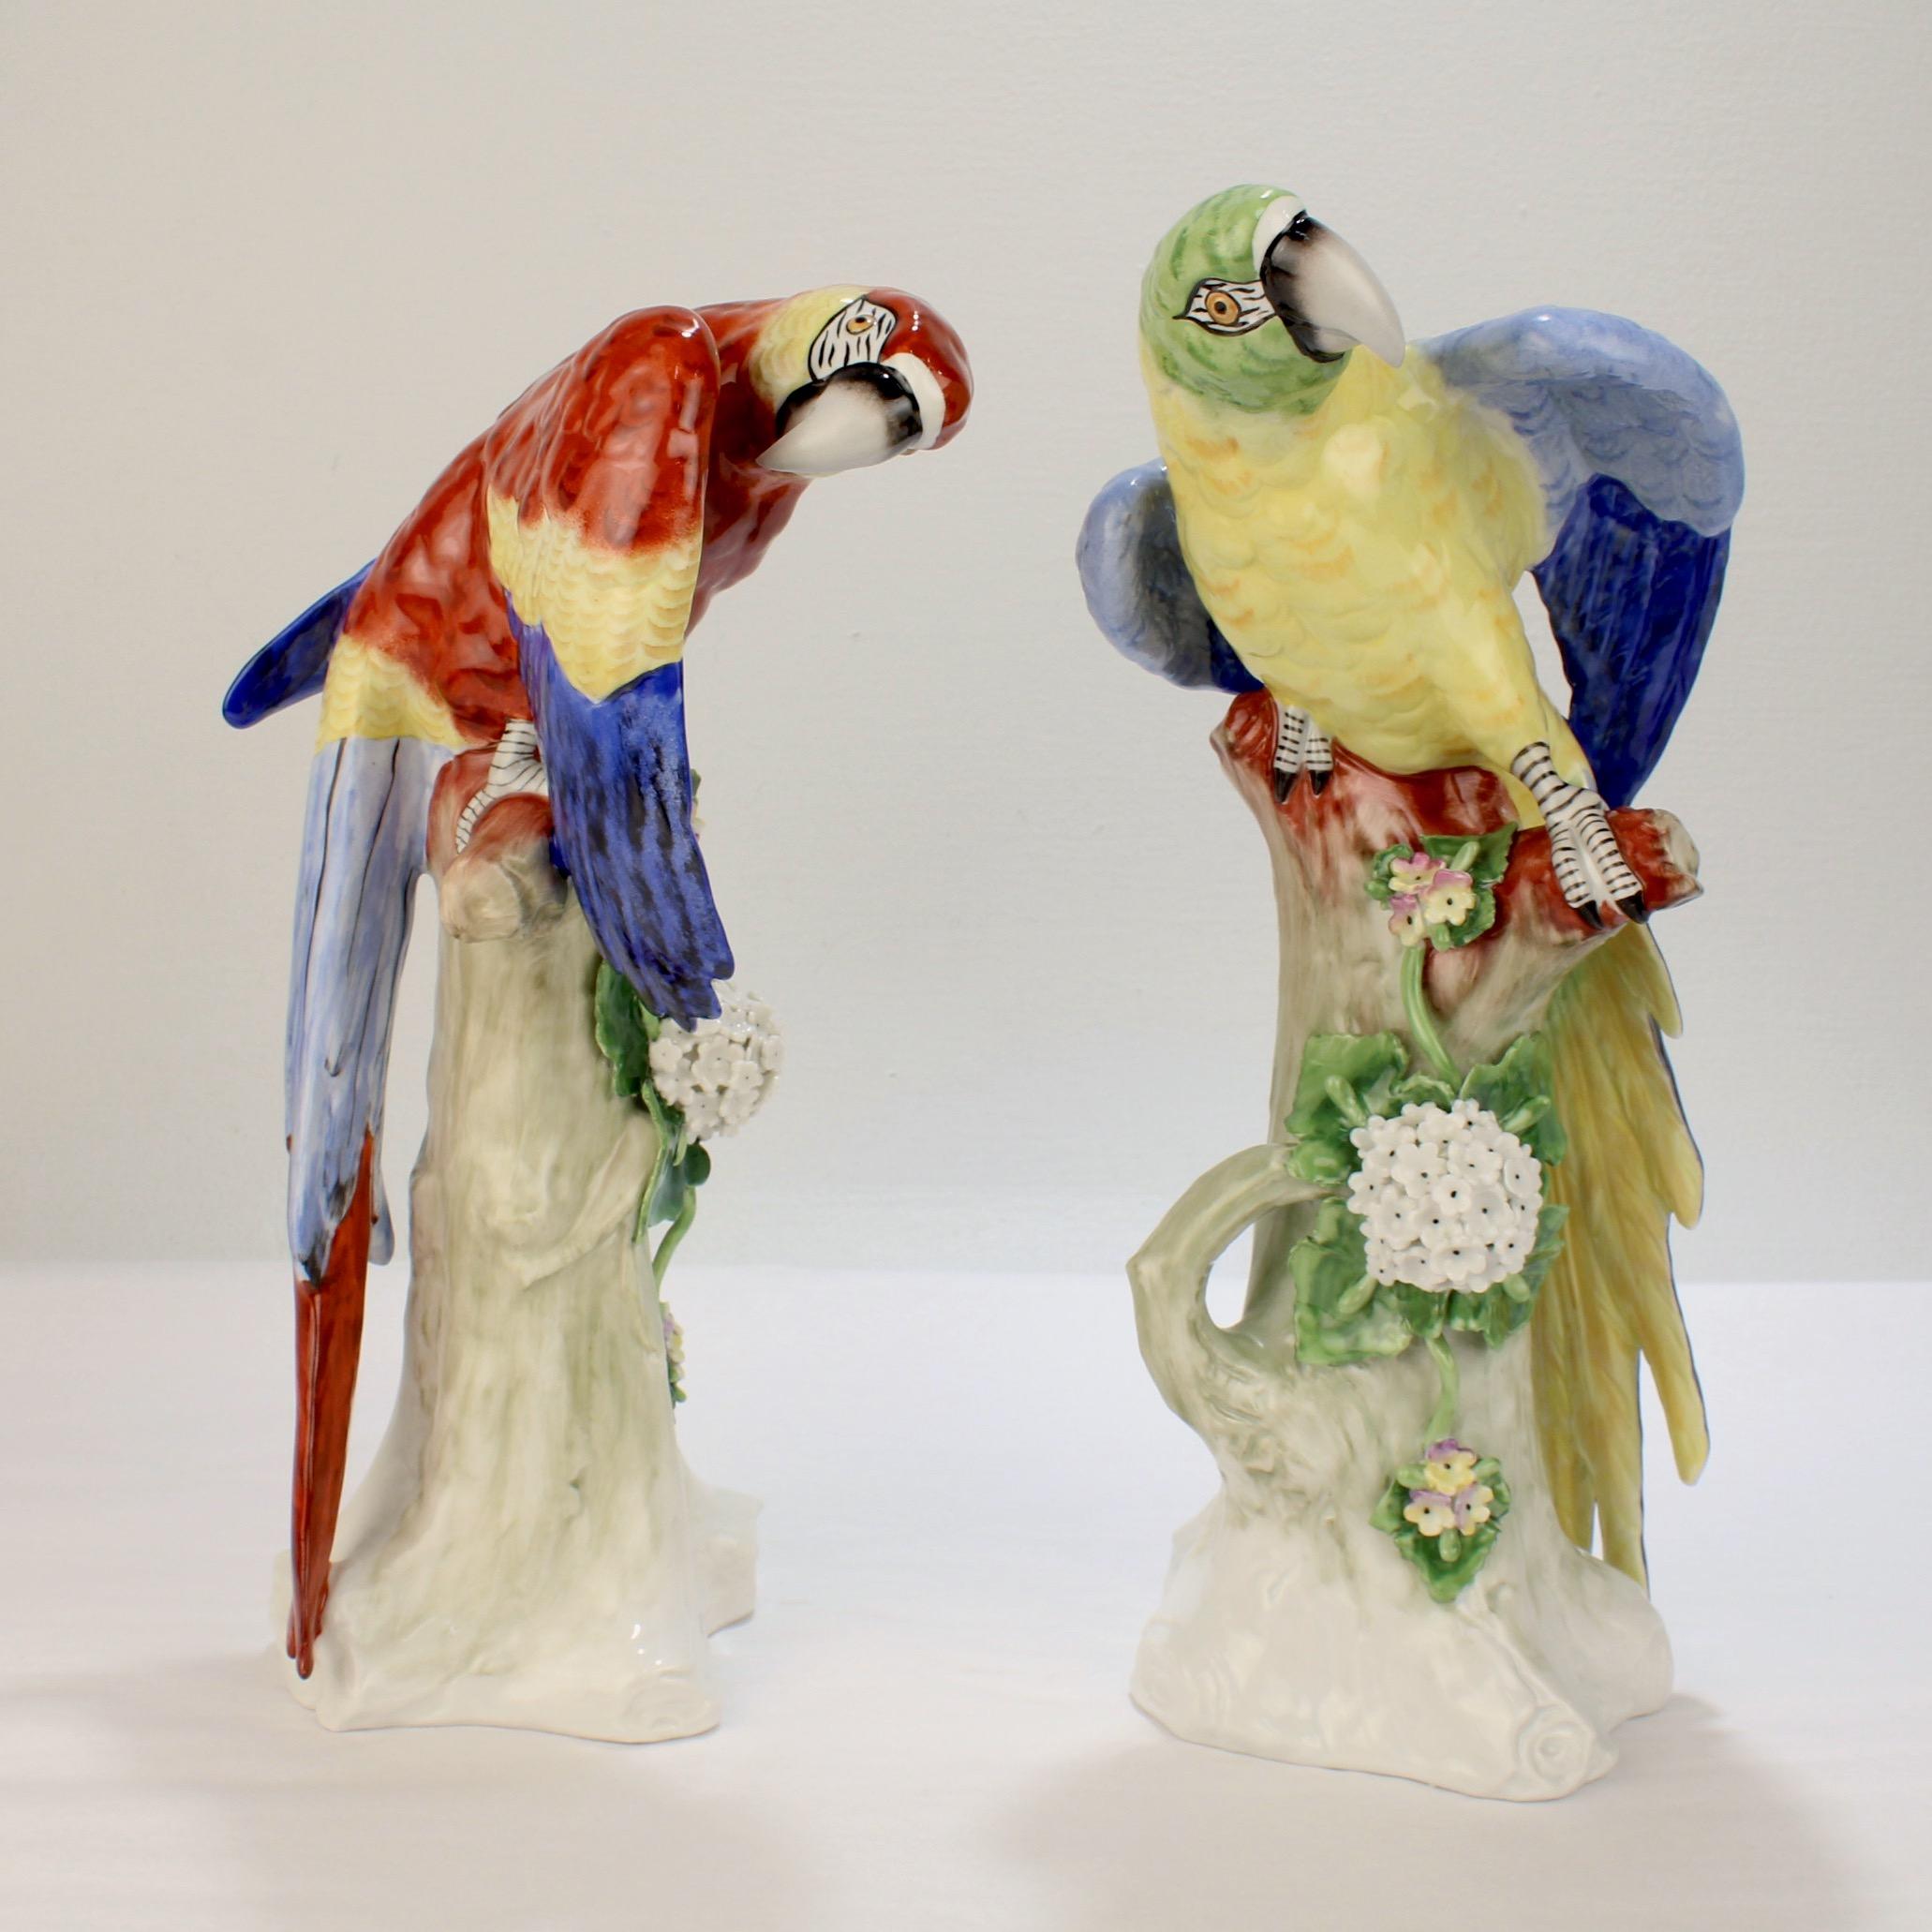 A fine pair of vintage German porcelain figurines.

Modeled as large Macaw parrots on tree stumps.

Polychrome decorated with three-dimensional flowers and leaves.

Simply impressive, beautiful birds!

Date:
20th Century

Overall